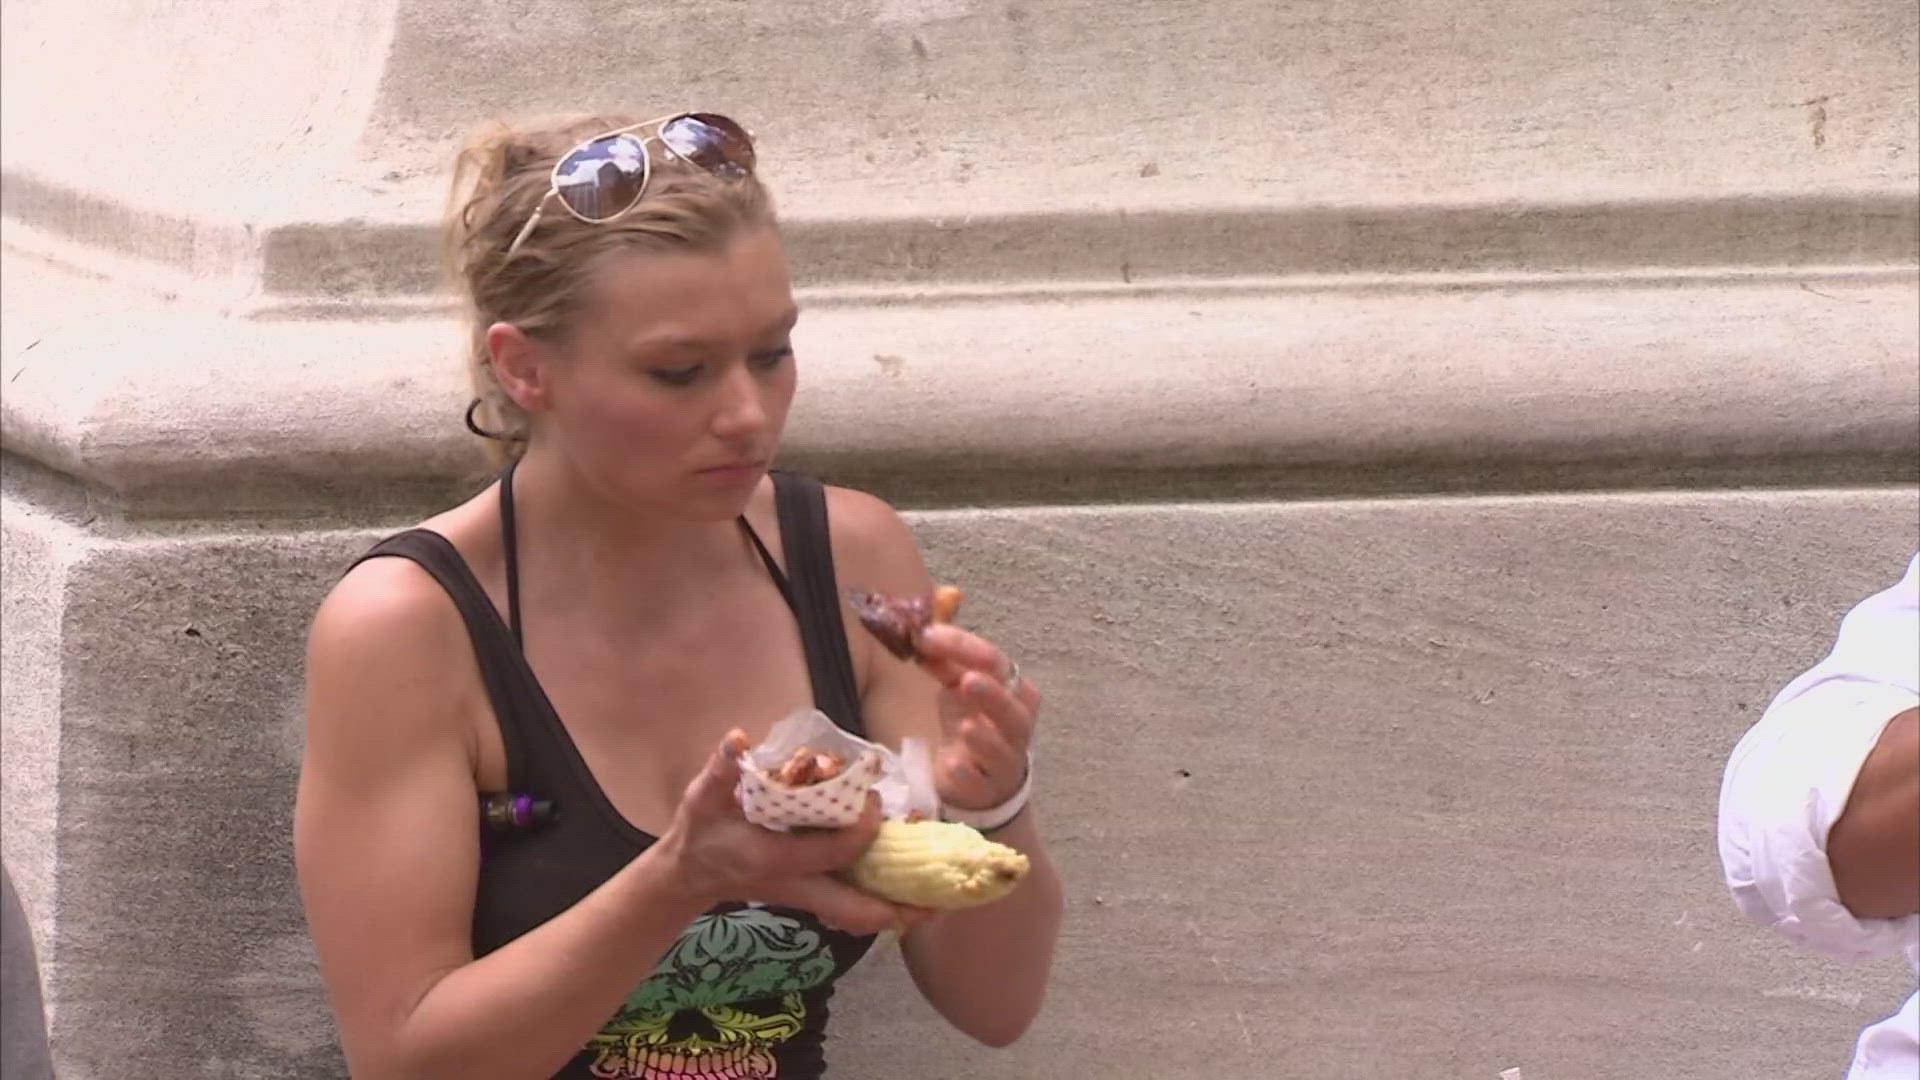 The food celebration returns to downtown Indy Saturday.